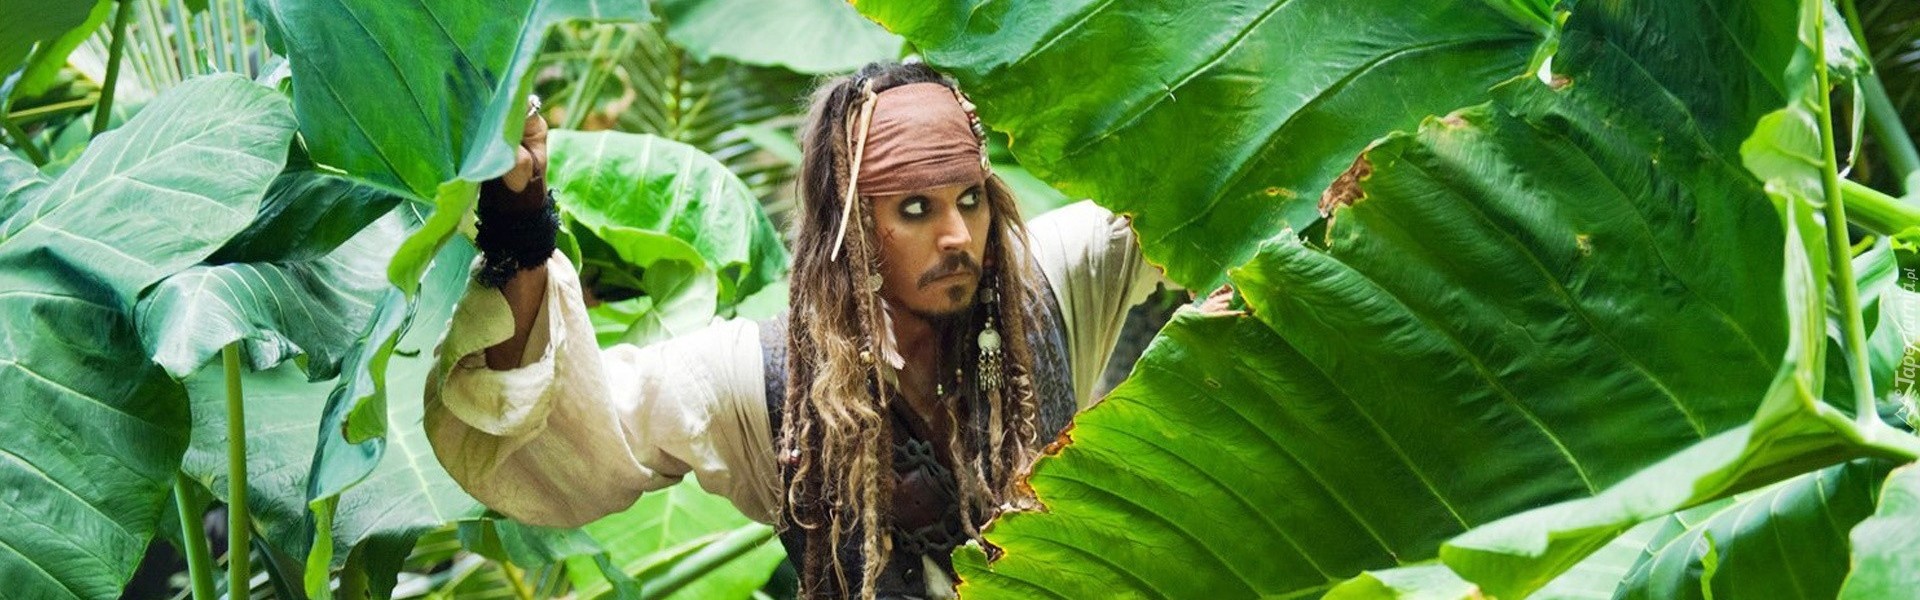 Will Disney and Johnny Depp reconcile? Will Captain Sparrow return?